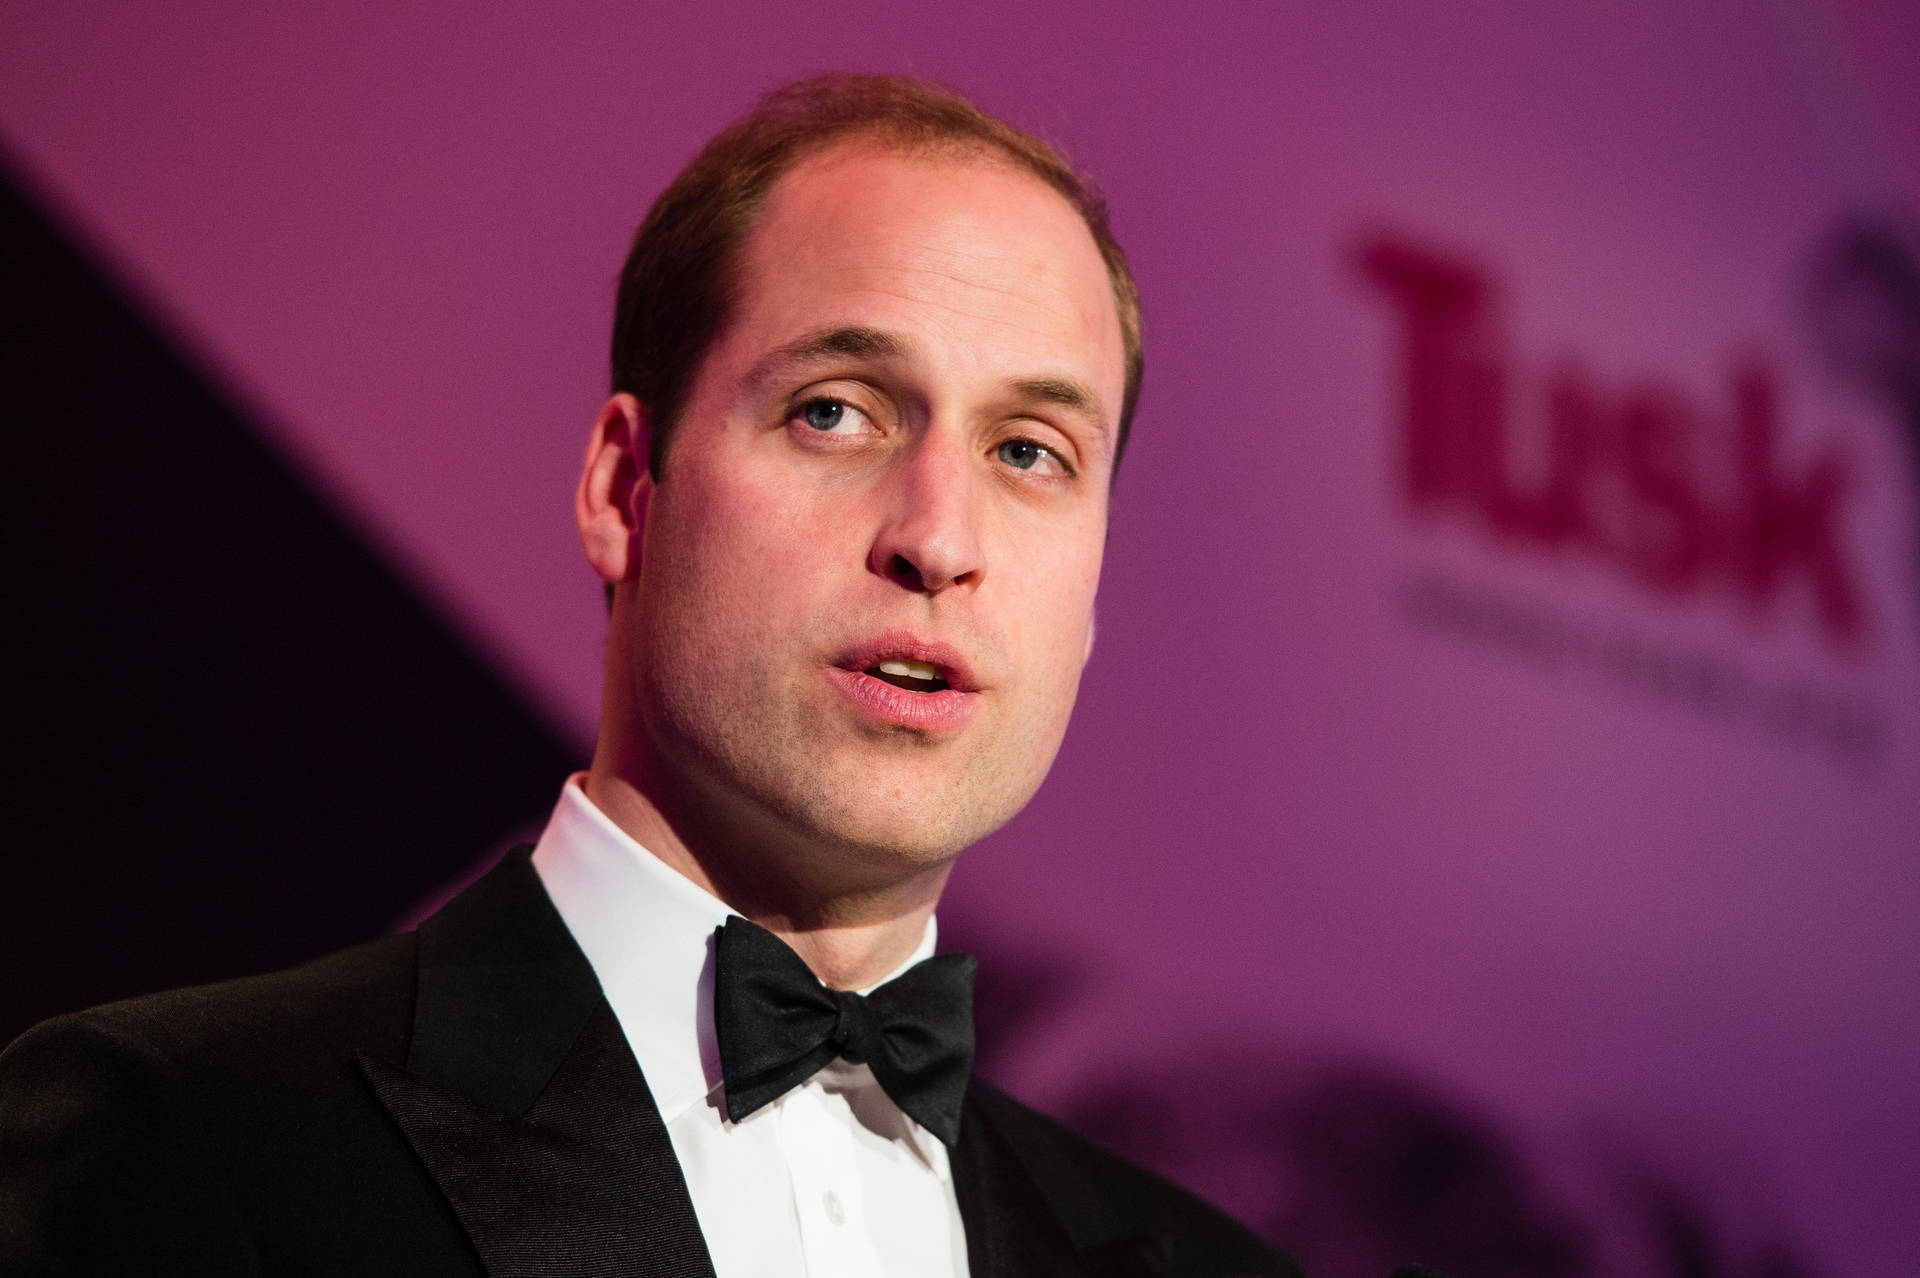 Prince William Dressed For A Formal Event Background